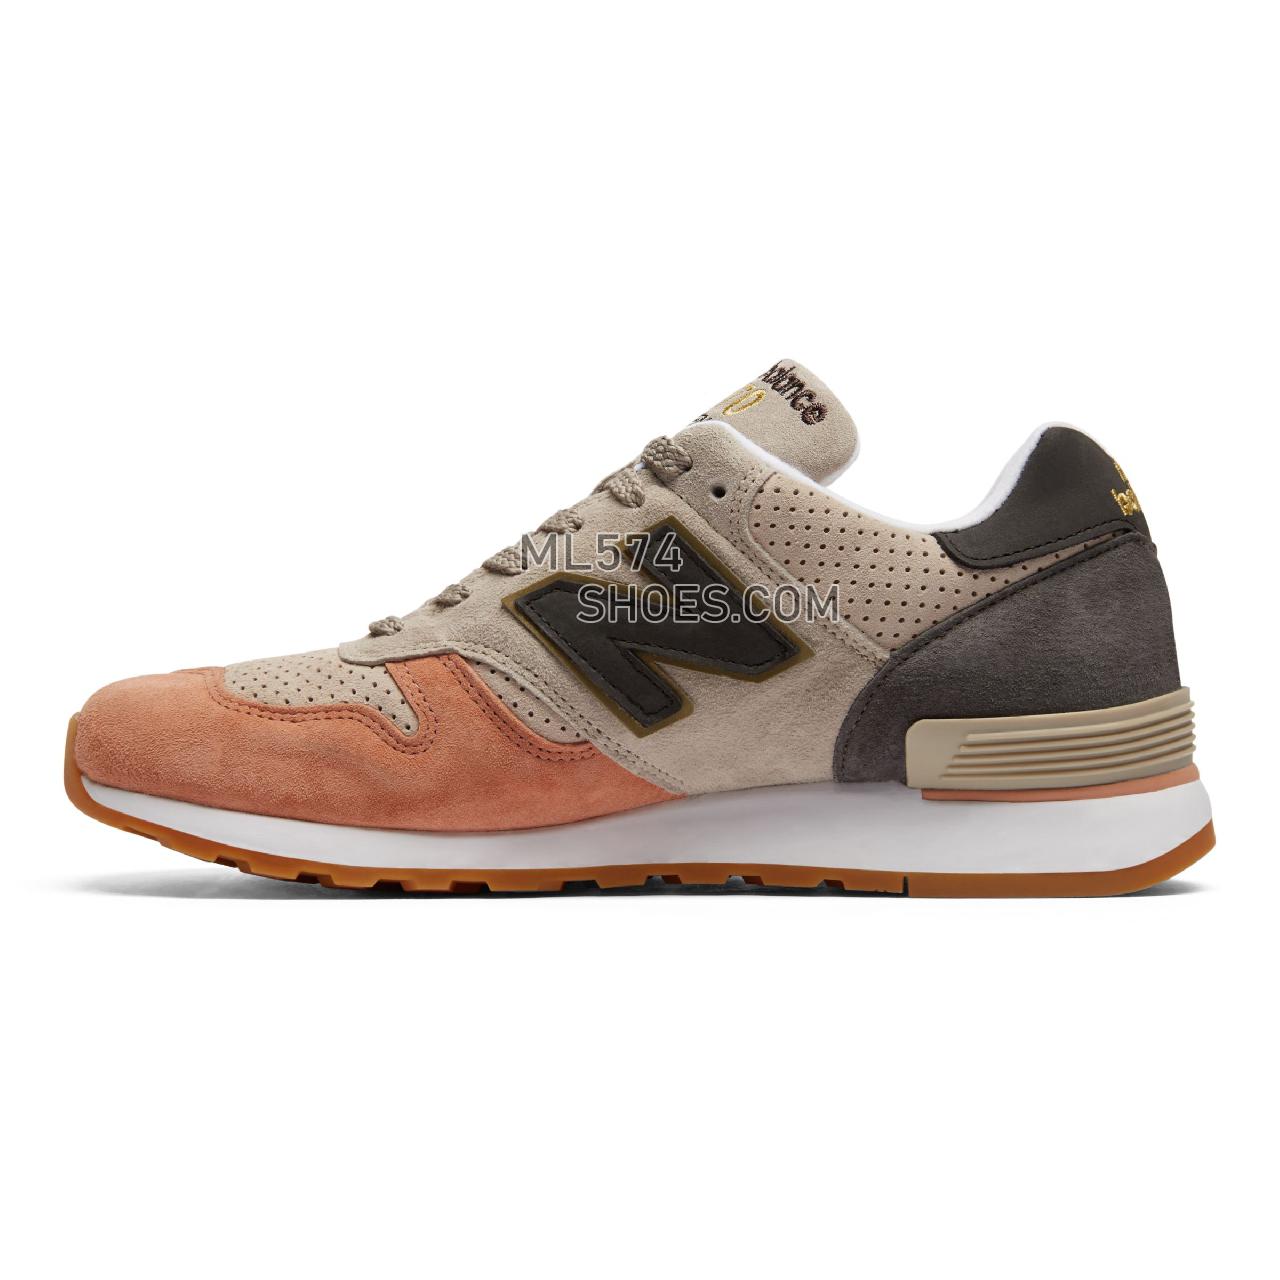 New Balance Made in UK 670 - Men's Made in USA And UK Sneakers - Nude with Pink and Grey - M670YOR